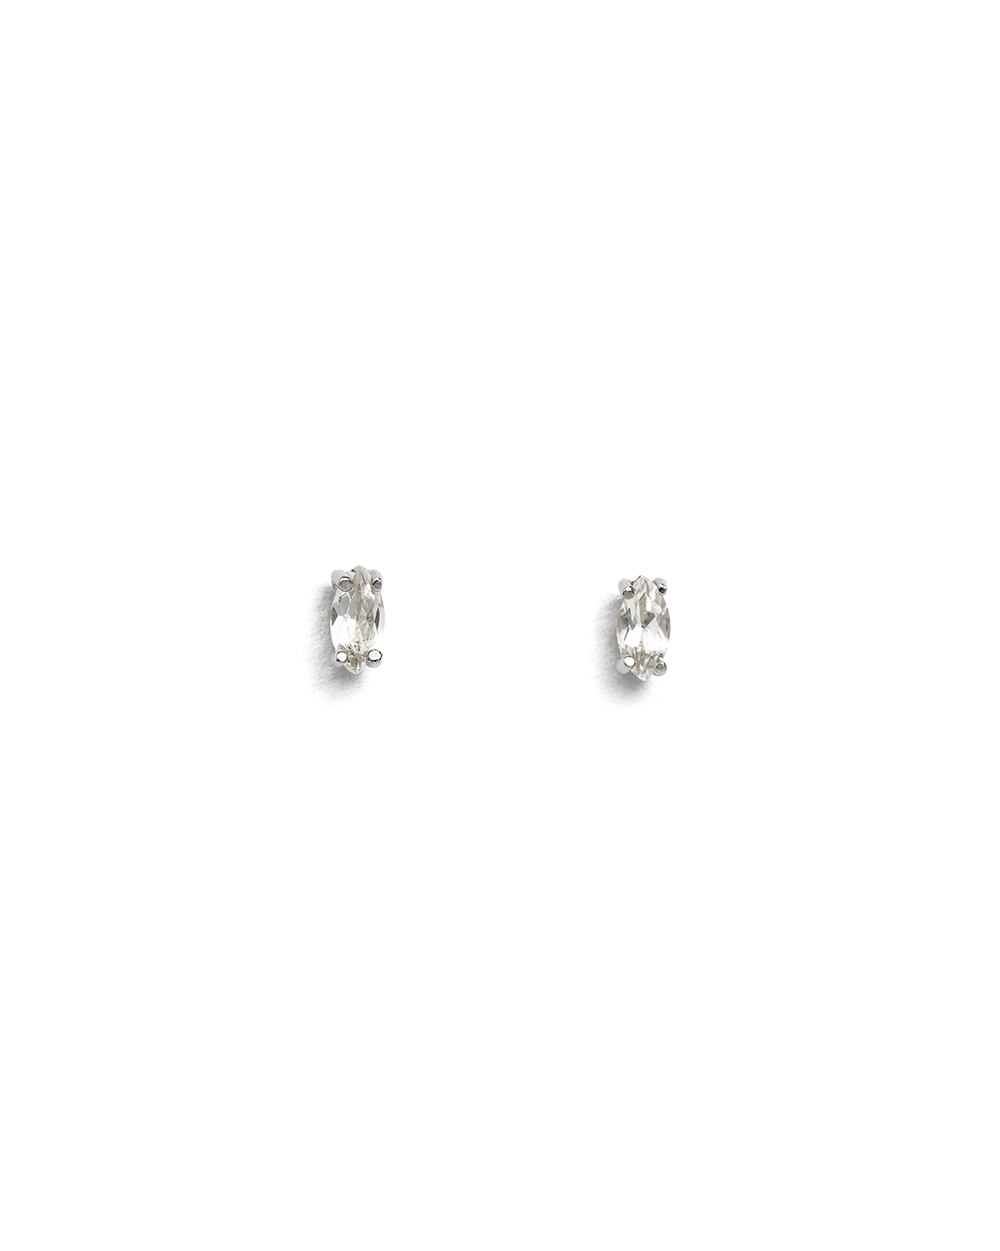 MARQUISE TOPAZ STUDS (STERLING SILVER) - IMAGE 1